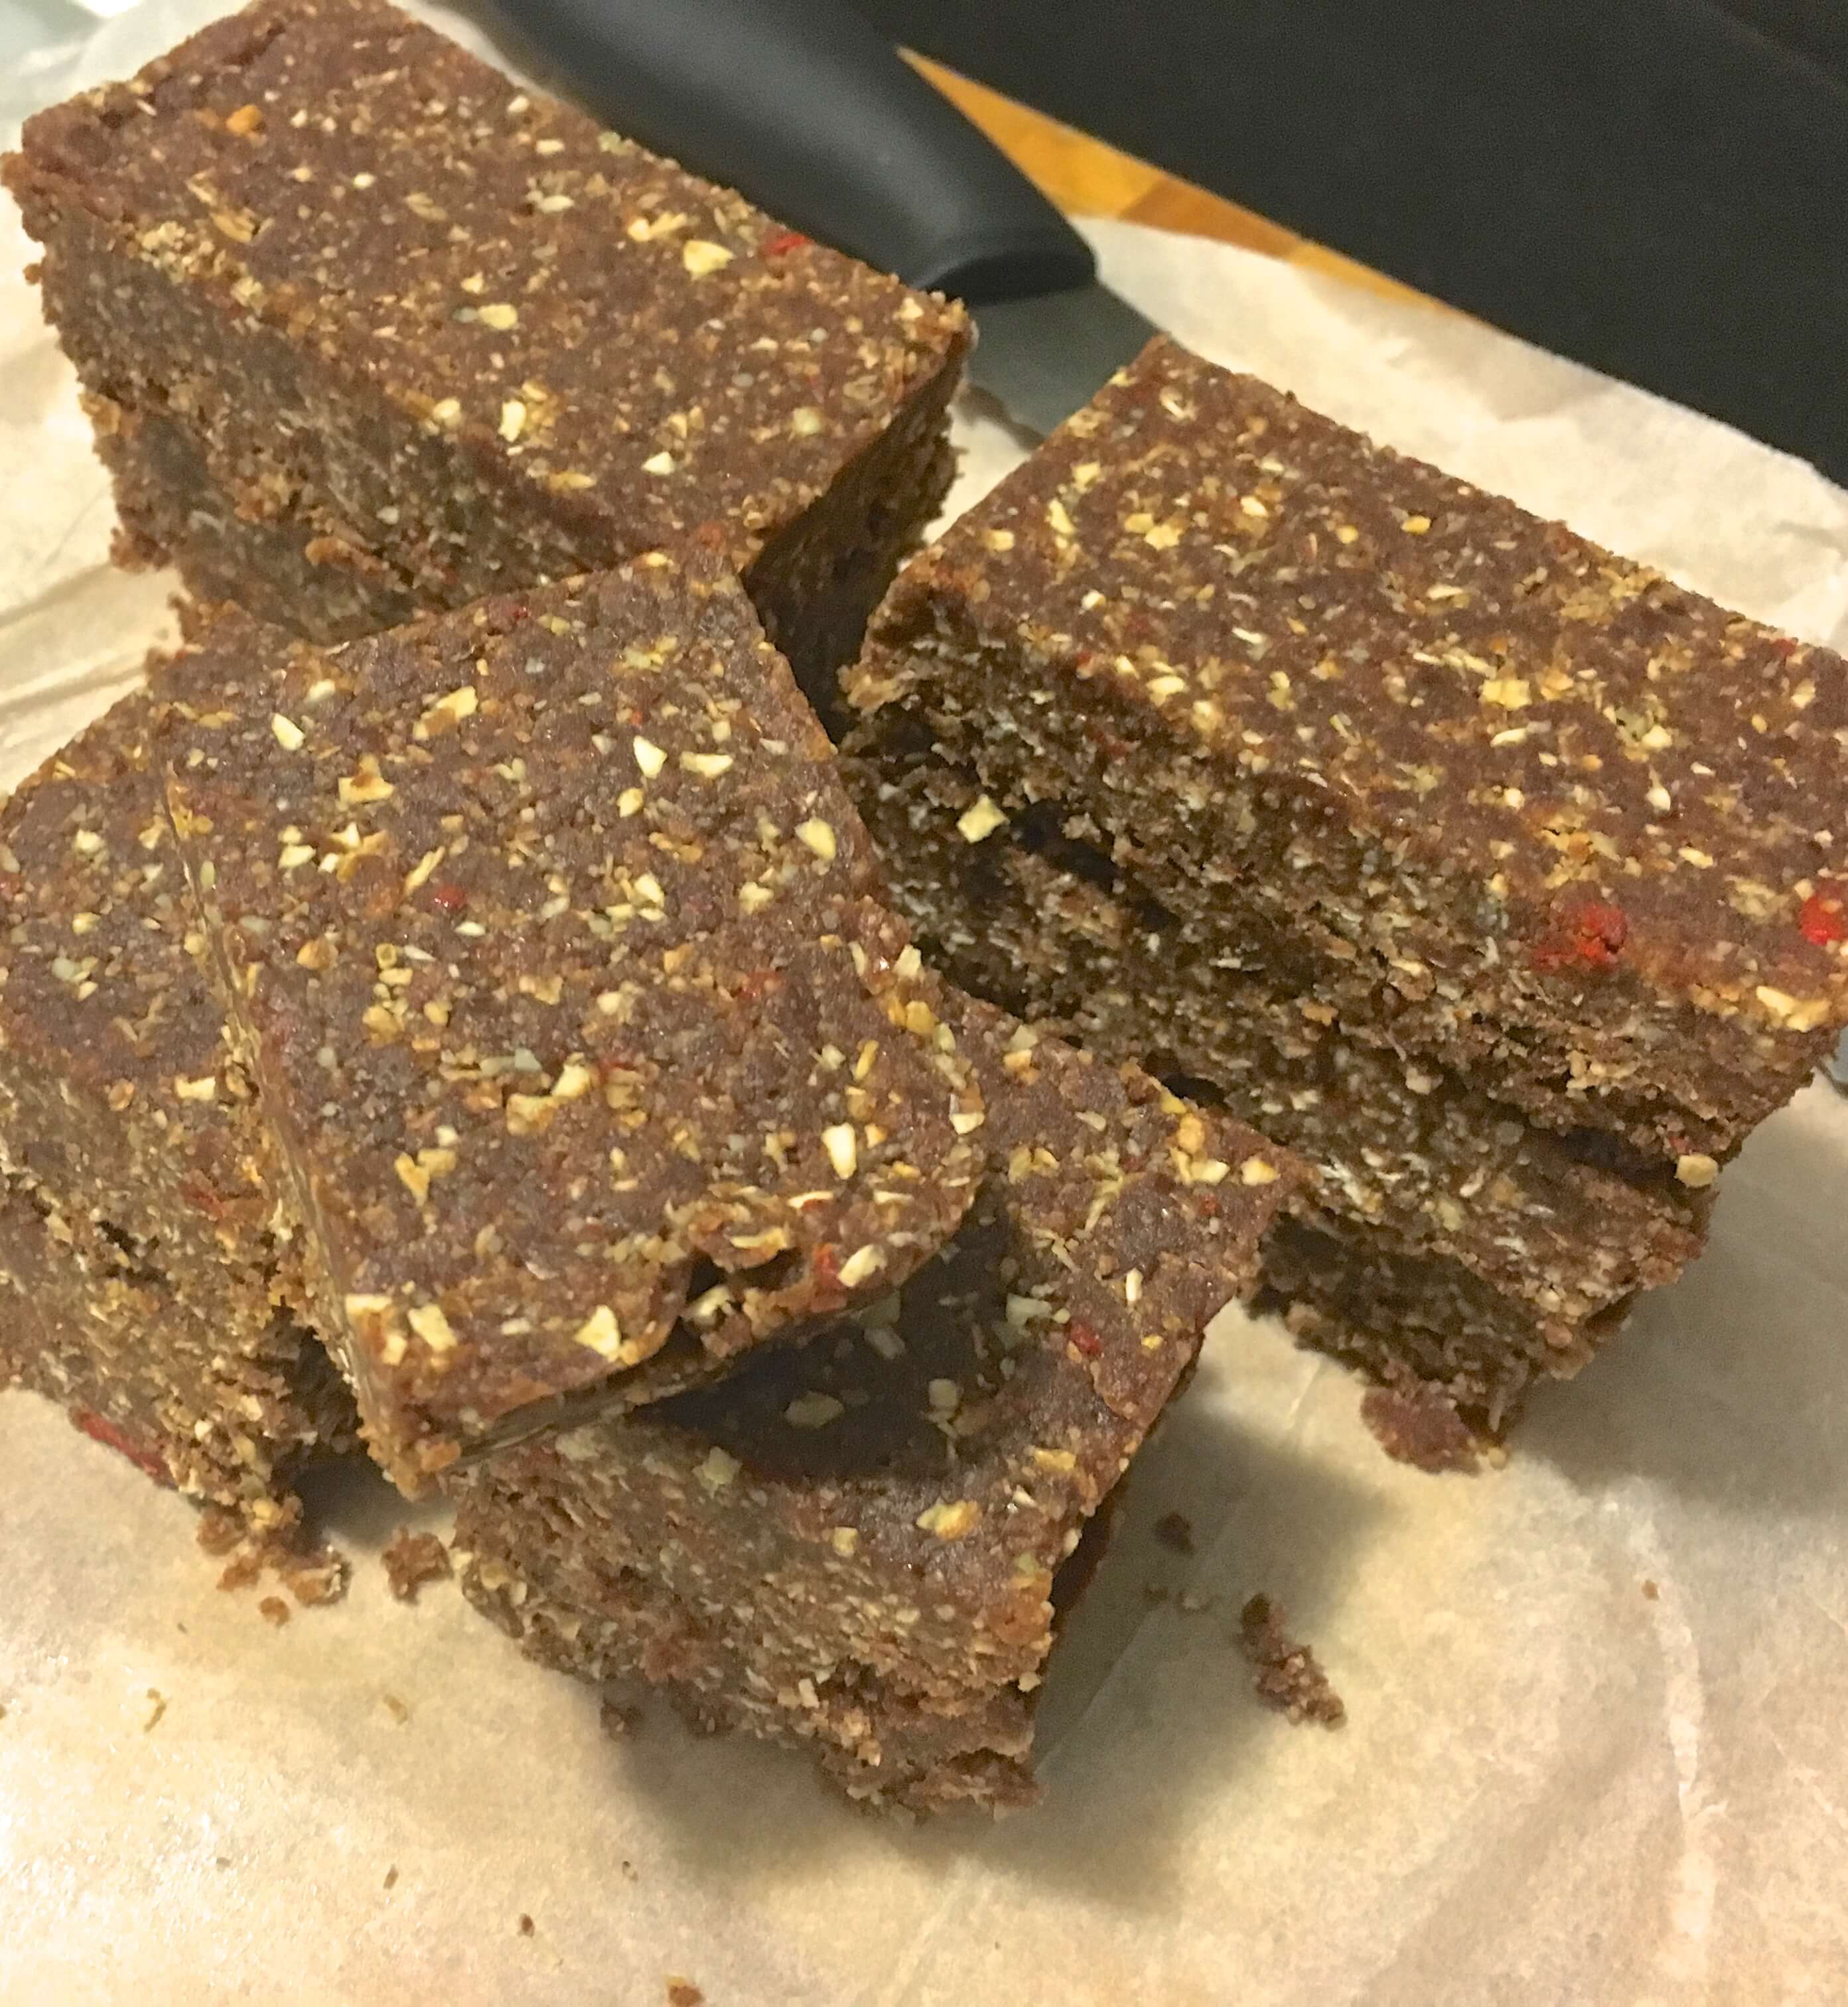 These chocolate energy bars are a fabulous post workout snack